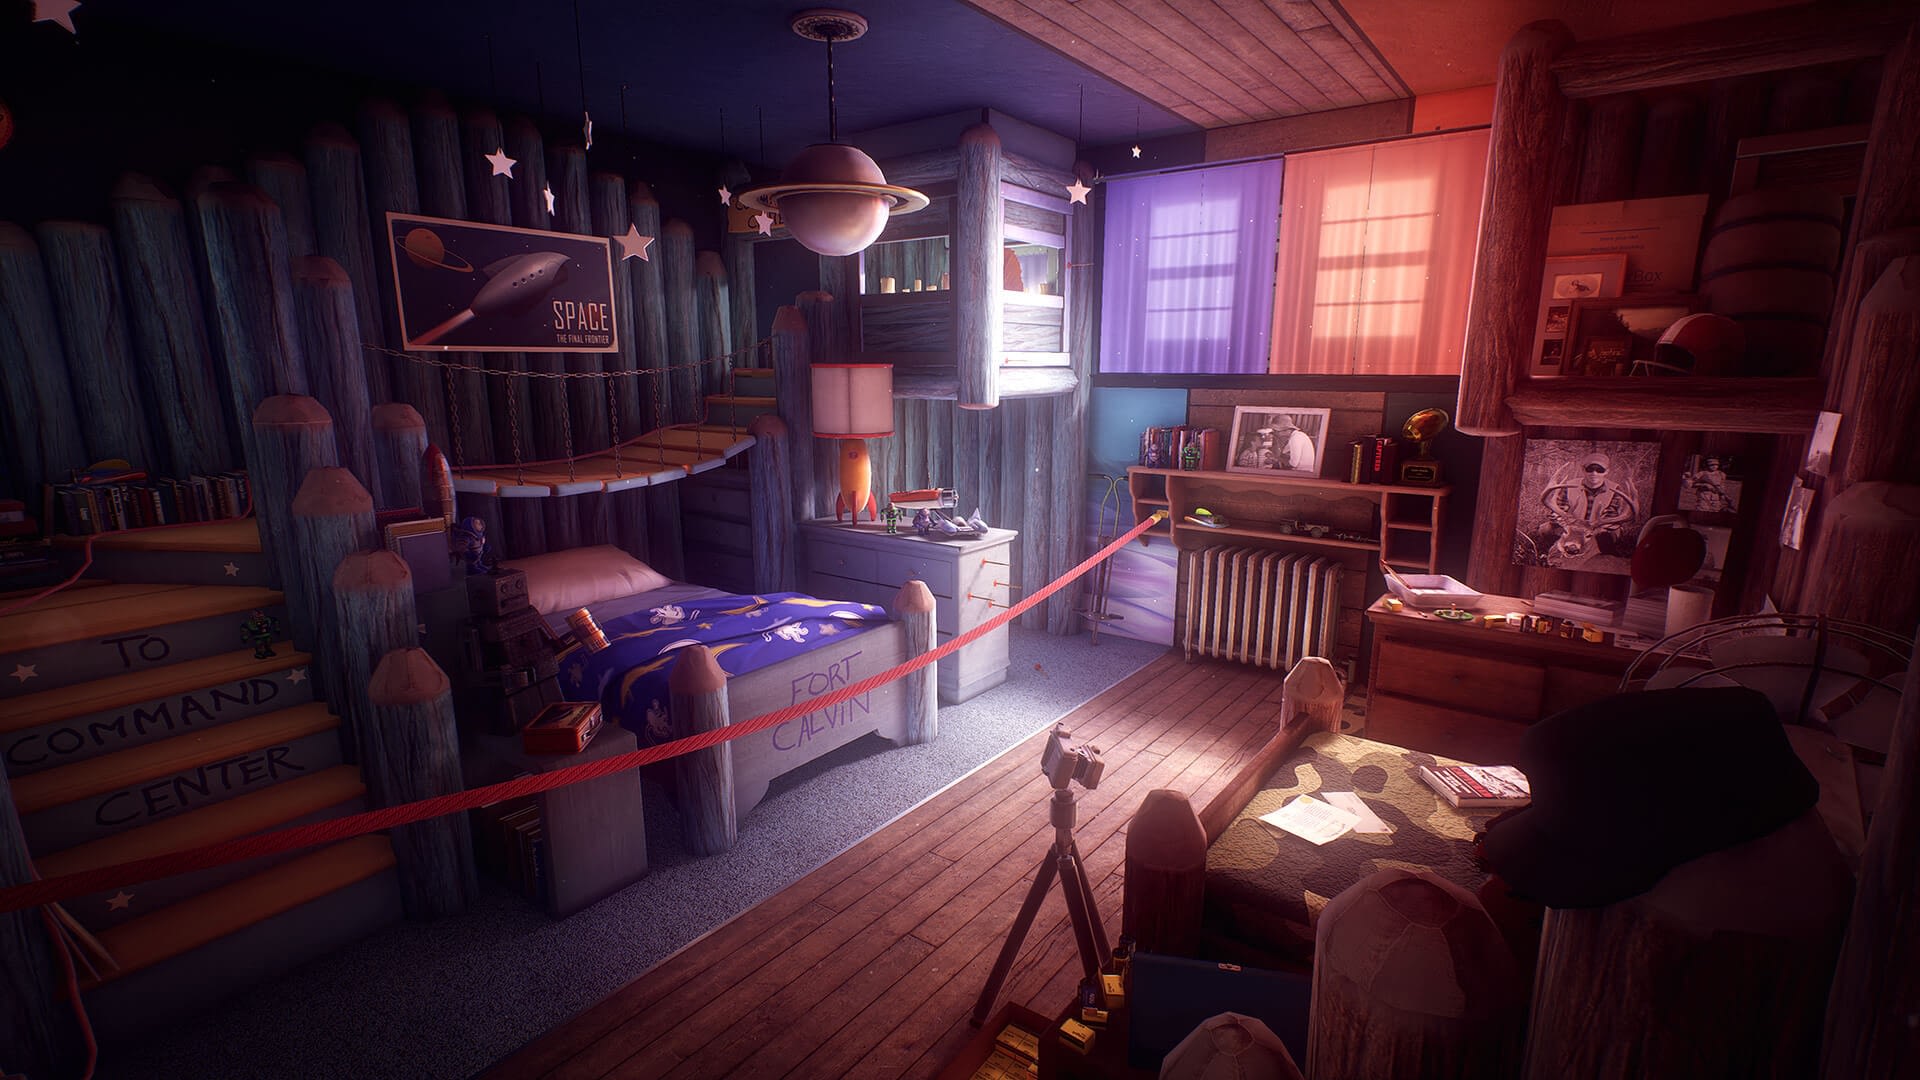 Review: What Remains of Edith Finch is an essential game that shows the beauty of this medium